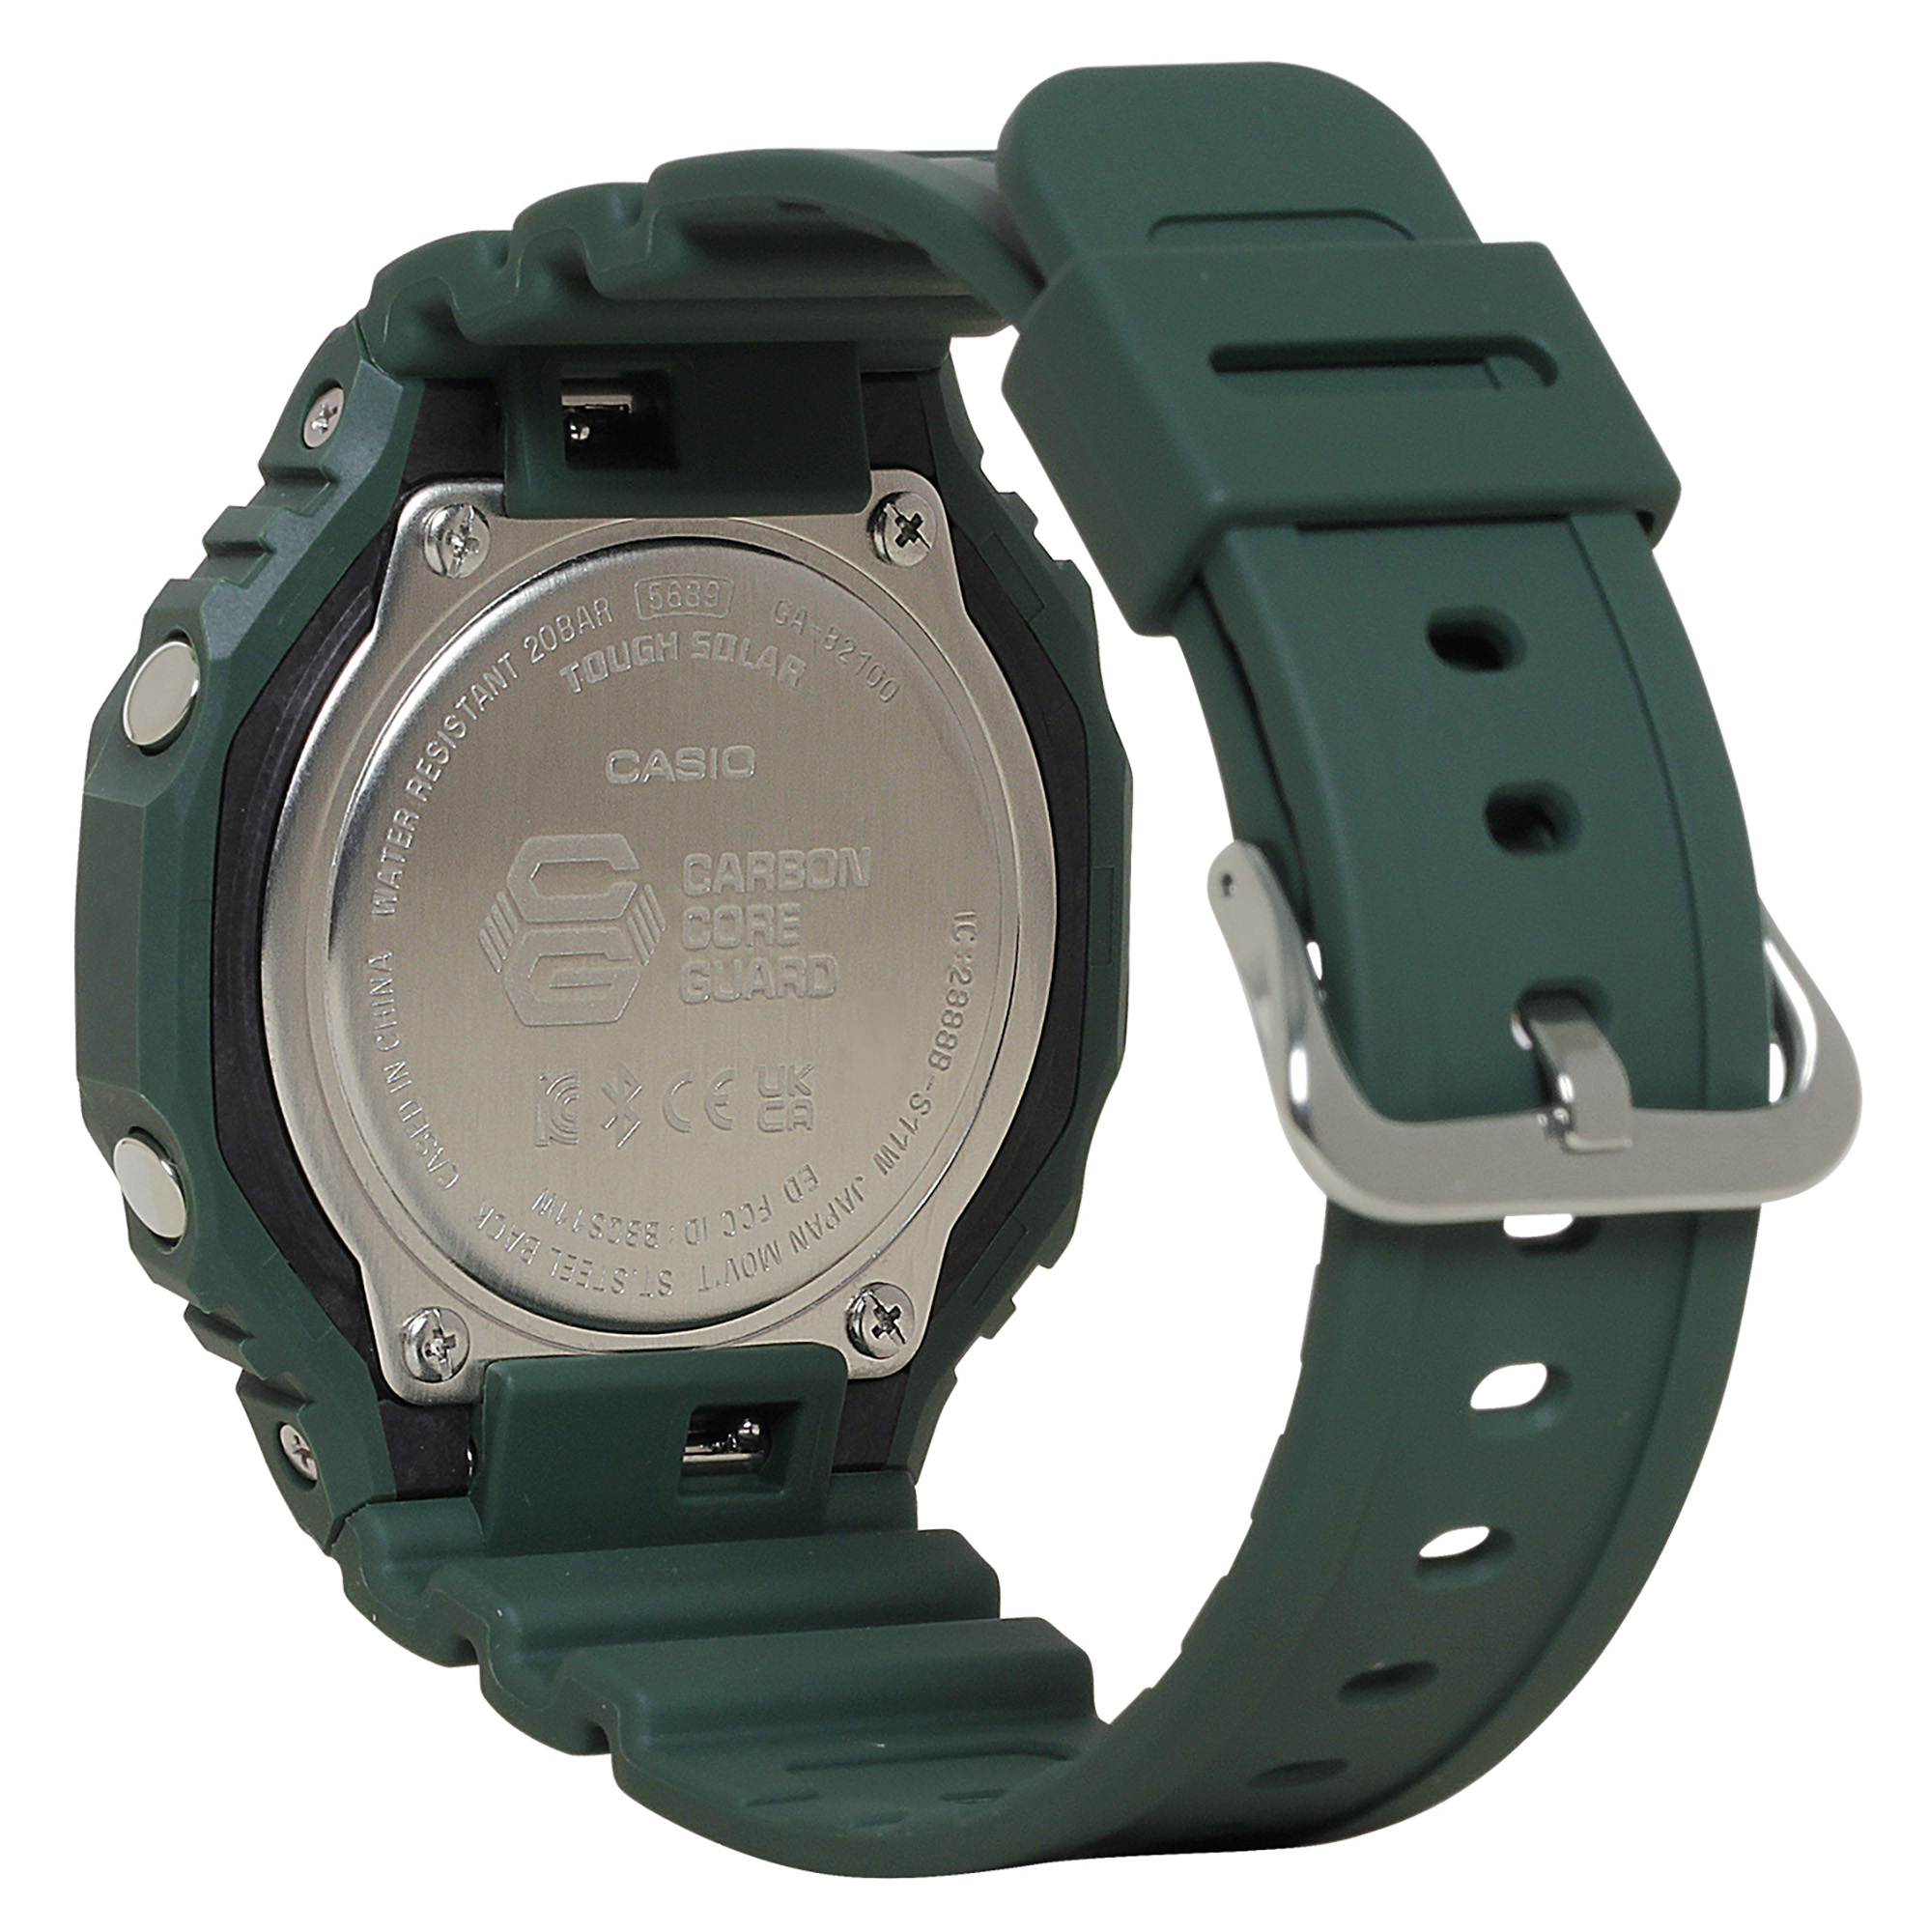 The new G-Shock GA-B2100 Adds Serious Functionality To The CasiOak